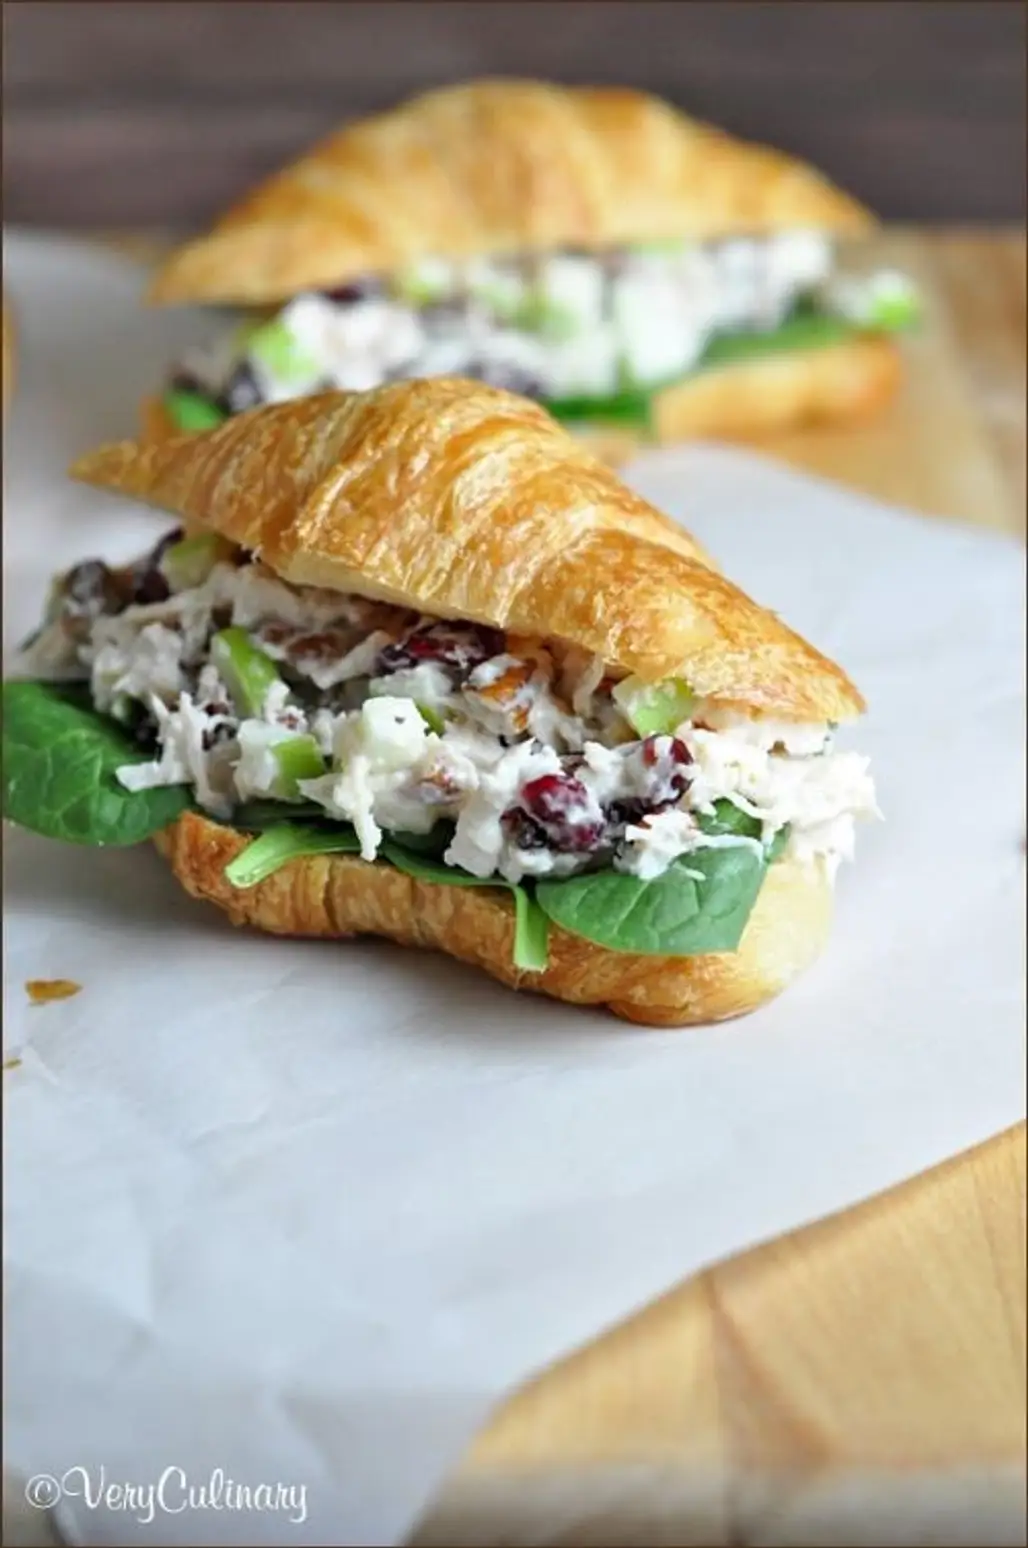 Fruity and Meaty: Chicken Salad Sandwich with Cranberries, Apples, and Pecans